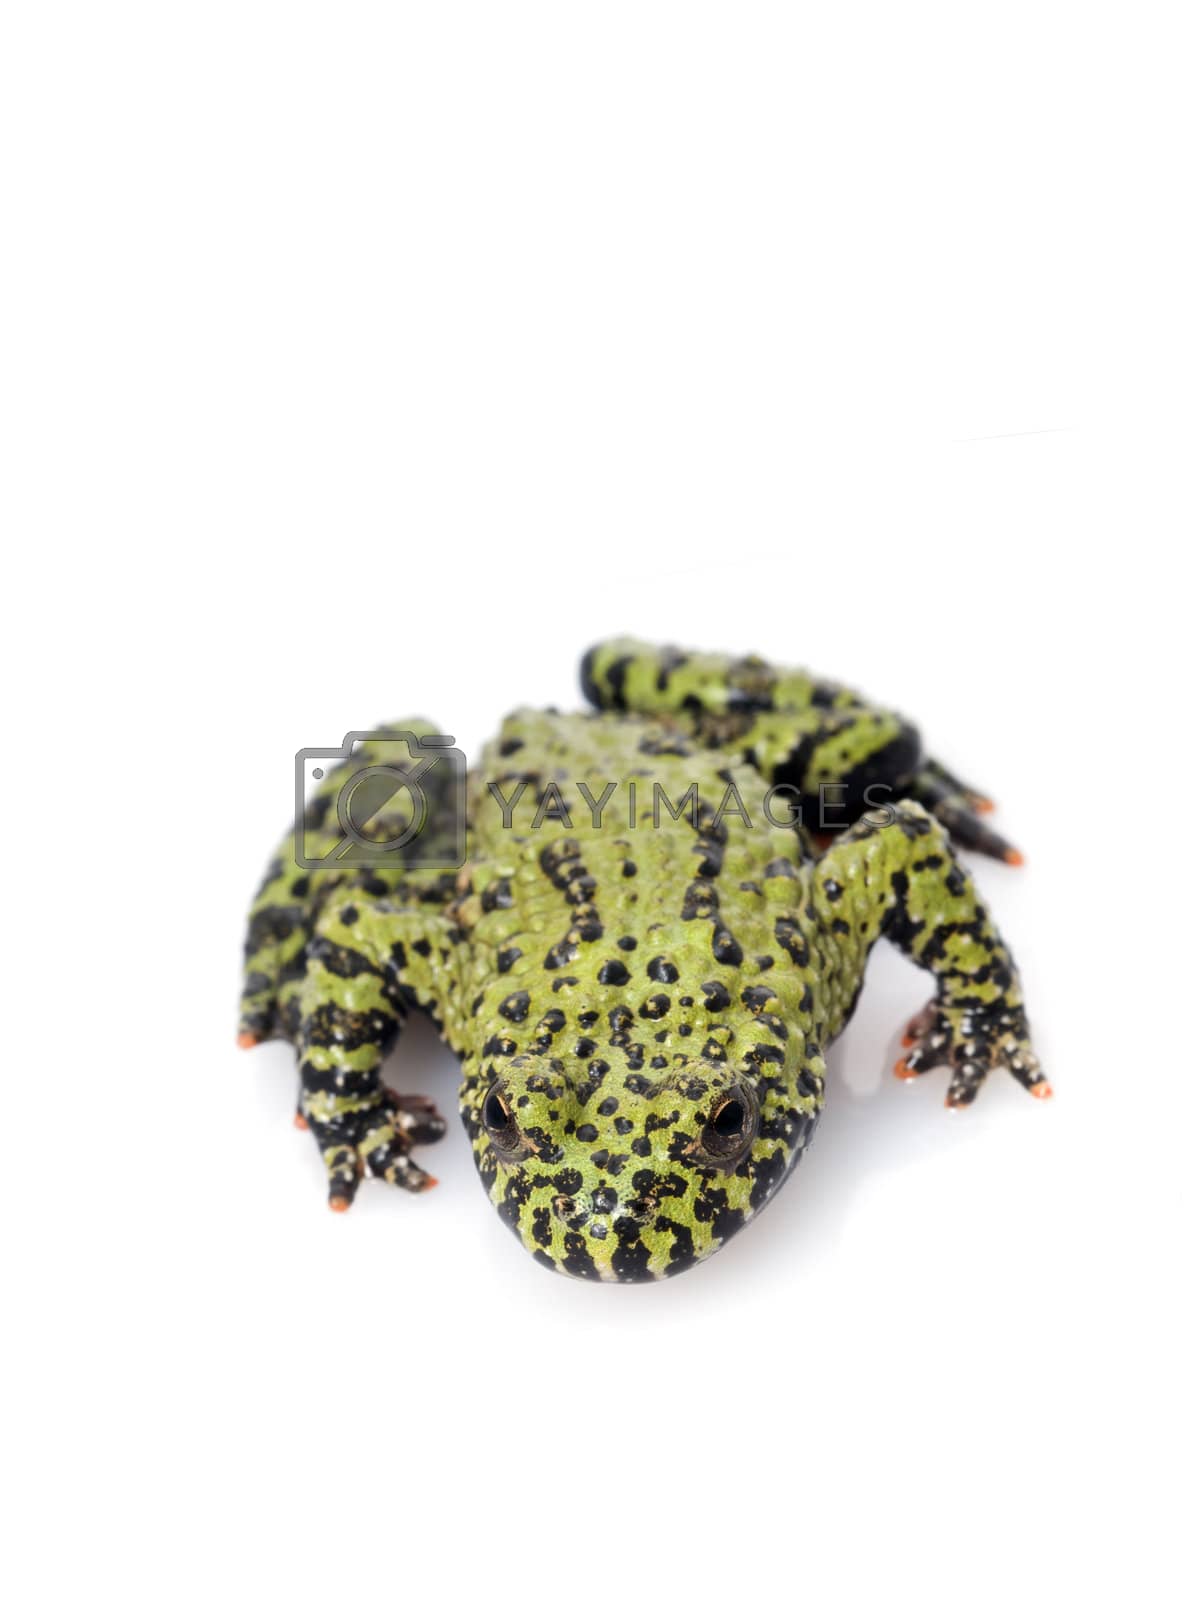 Royalty free image of Fire Belly Toad by Njean